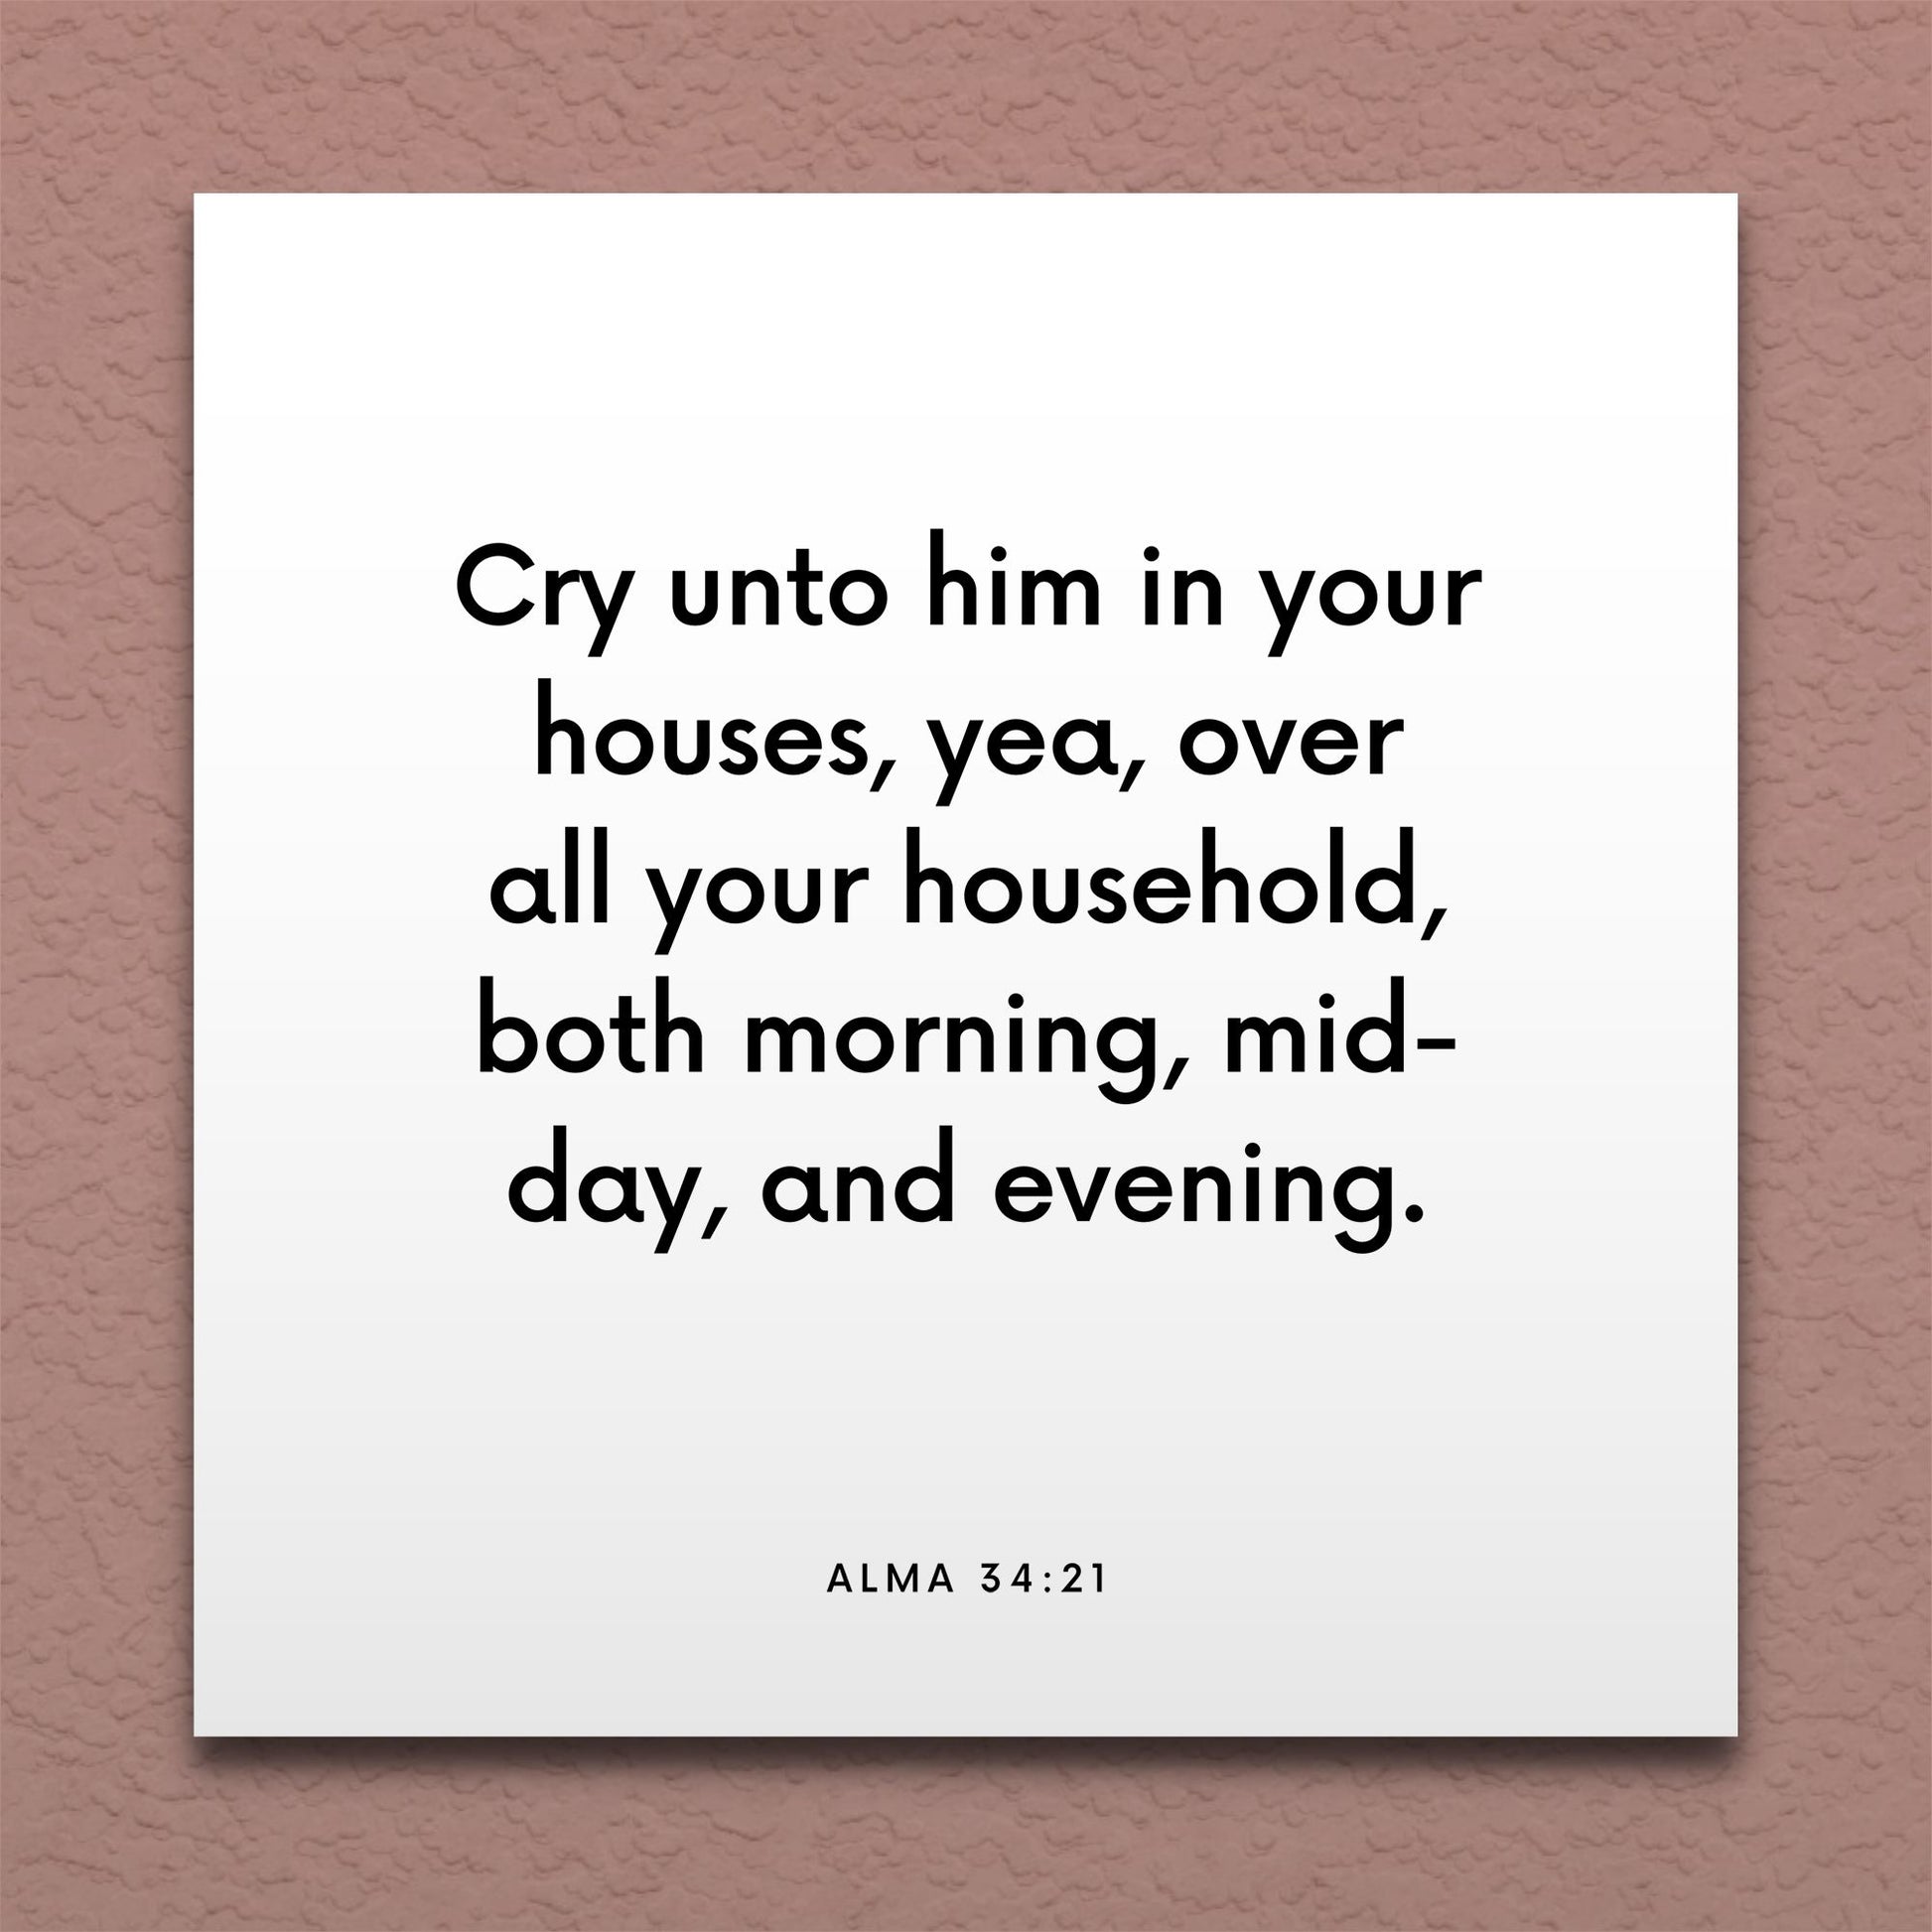 Wall-mounted scripture tile for Alma 34:21 - "Cry unto him in your houses, yea, over all your household"